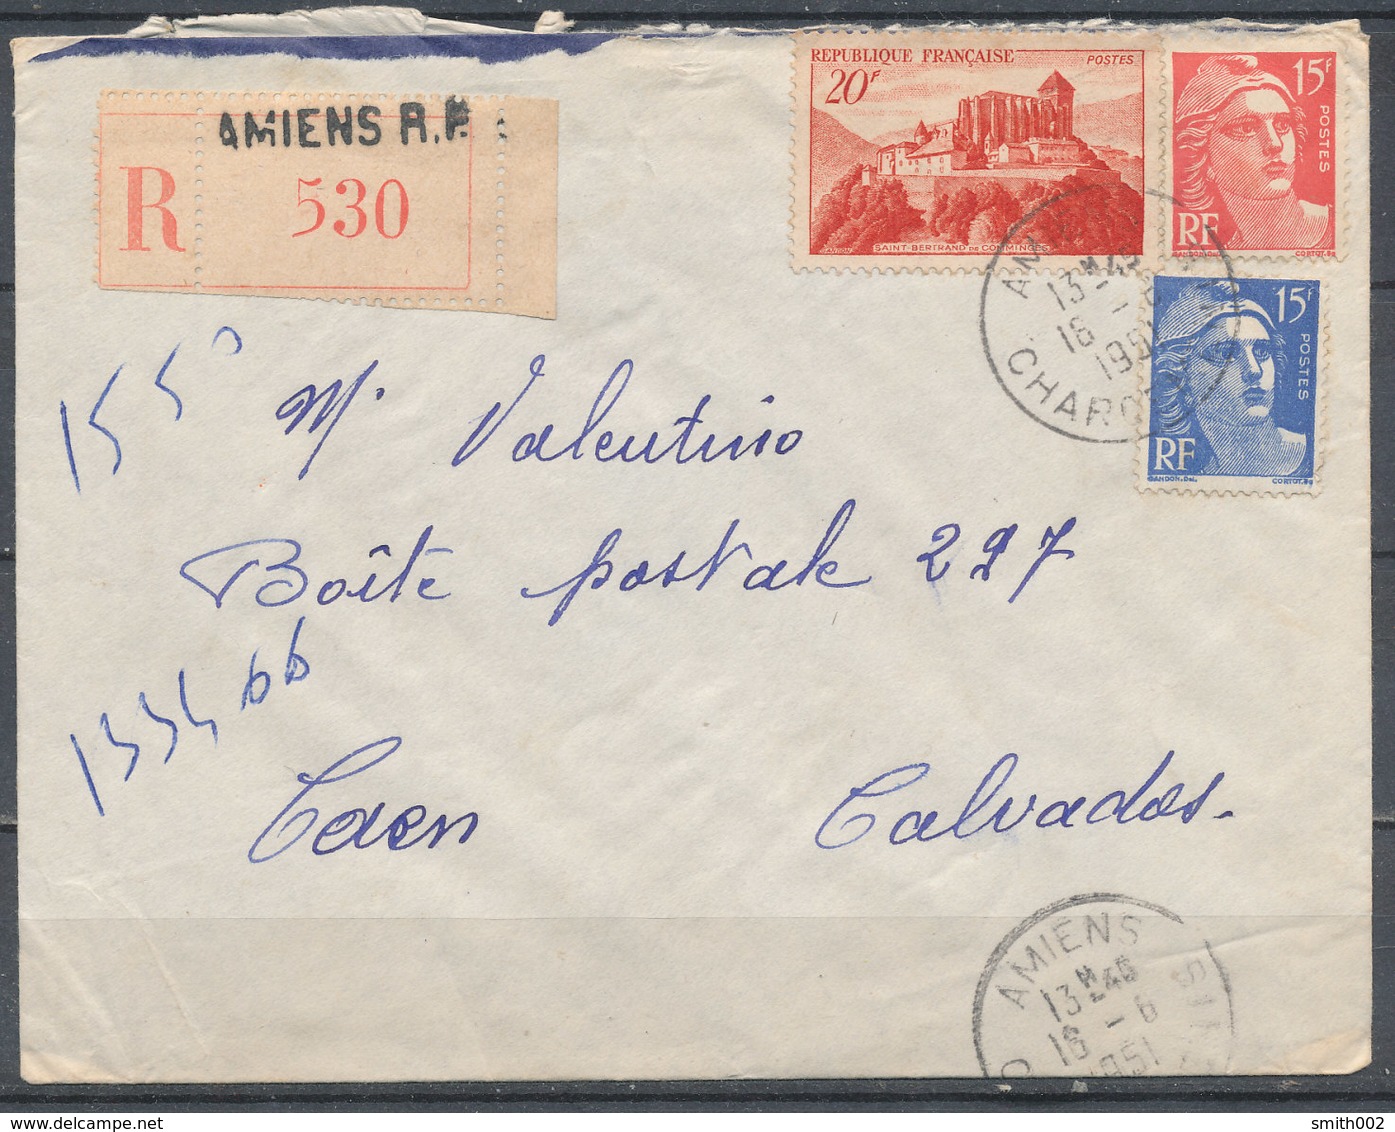 FRANCE - 18.6.1951, Reco Cover From AMIENS To CAEN (Calvados) - 1921-1960: Modern Period